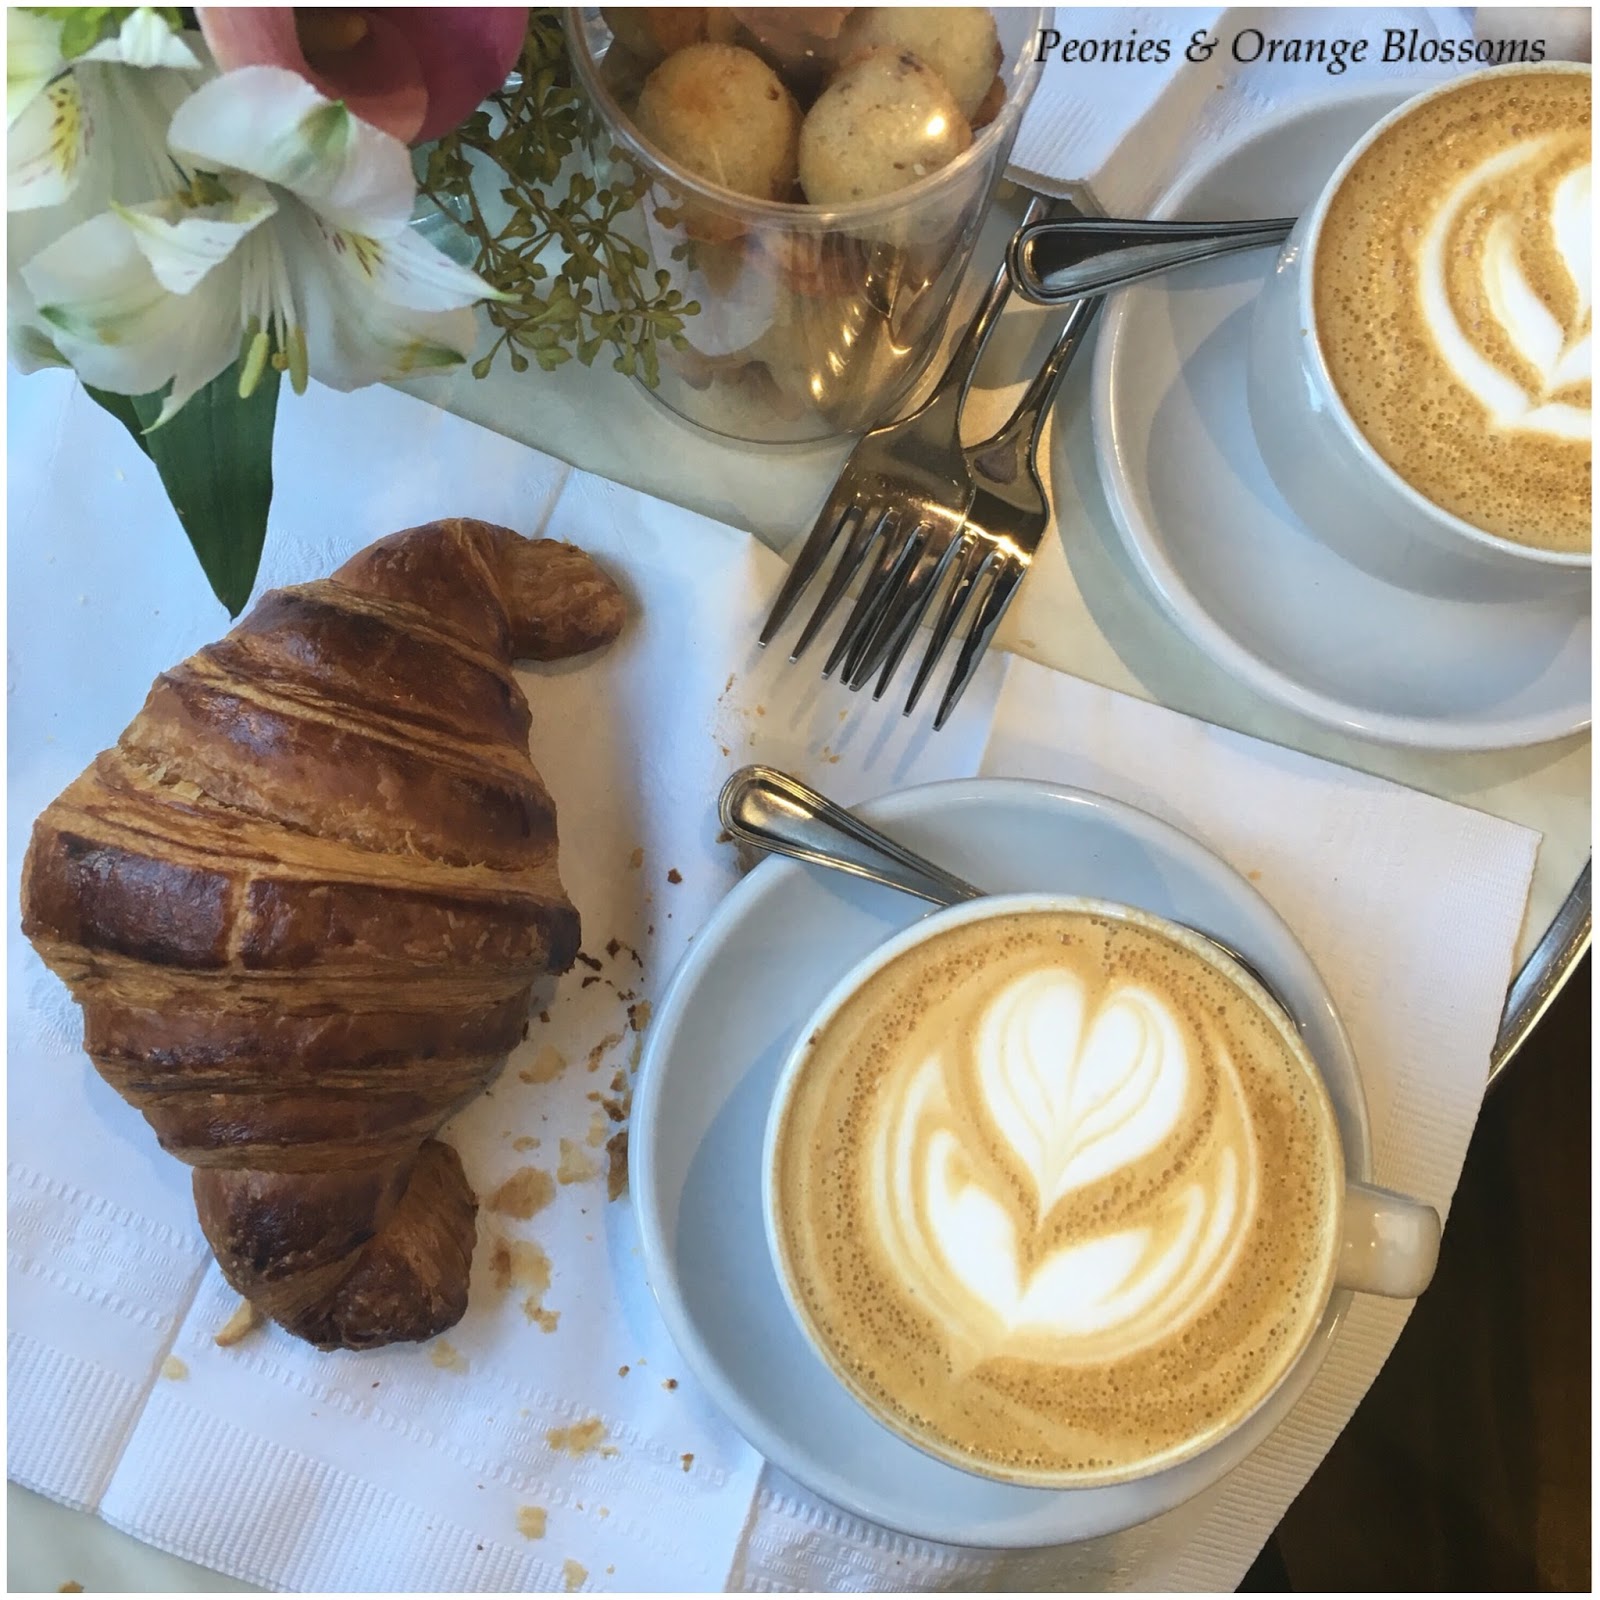 A Review of B. Patisserie in San Francisco